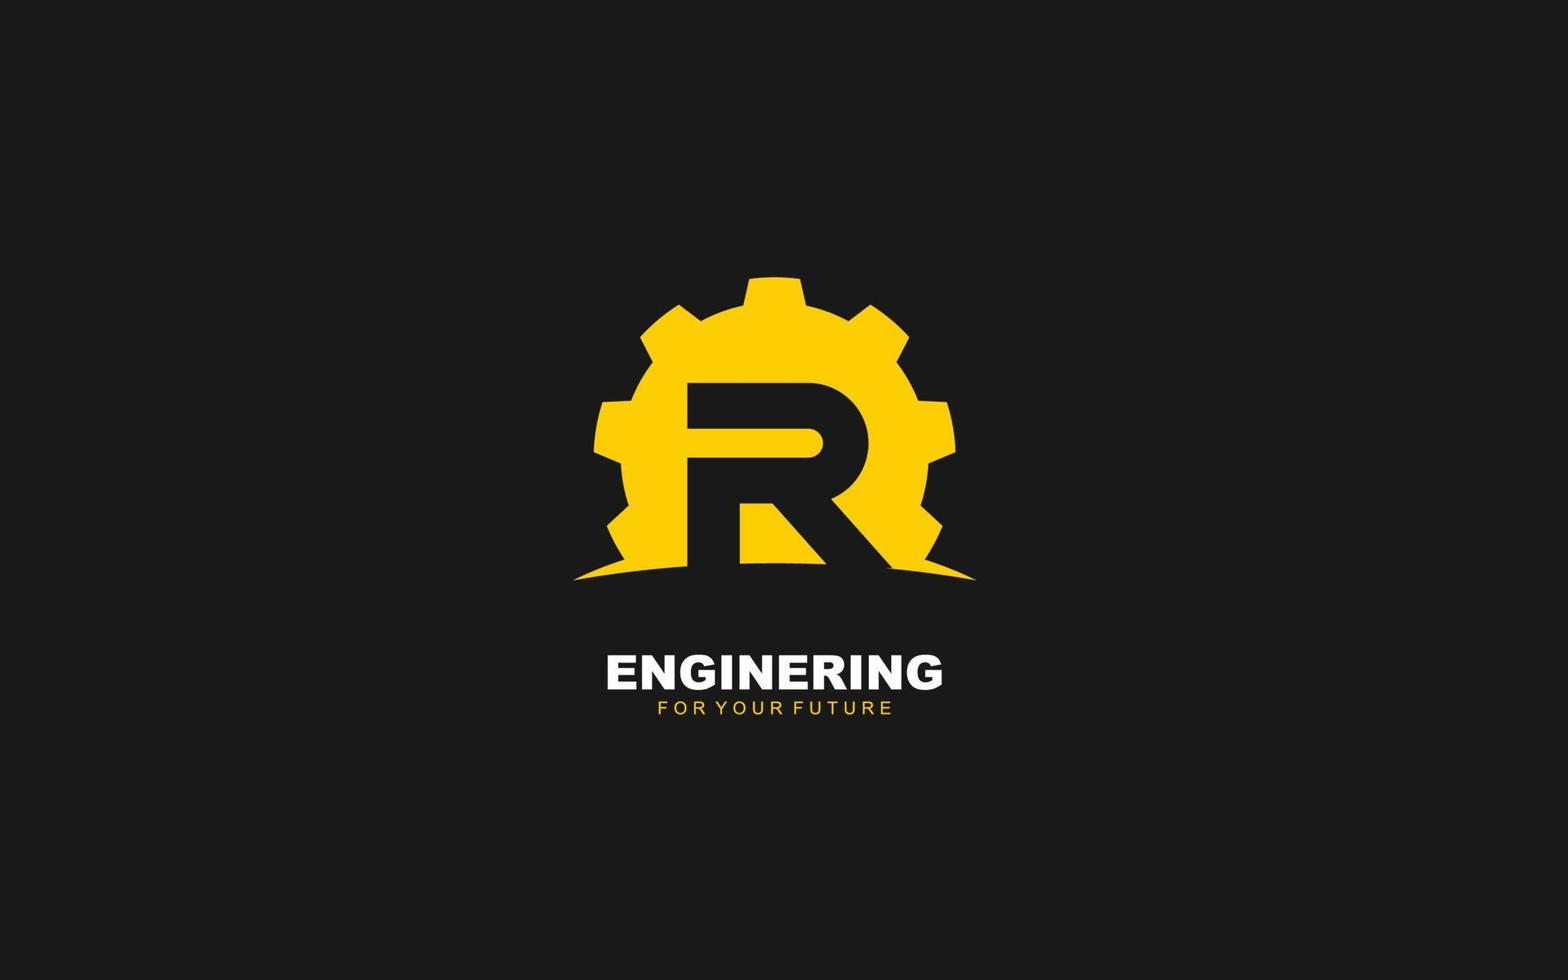 R logo gear for identity. industrial template vector illustration for your brand.